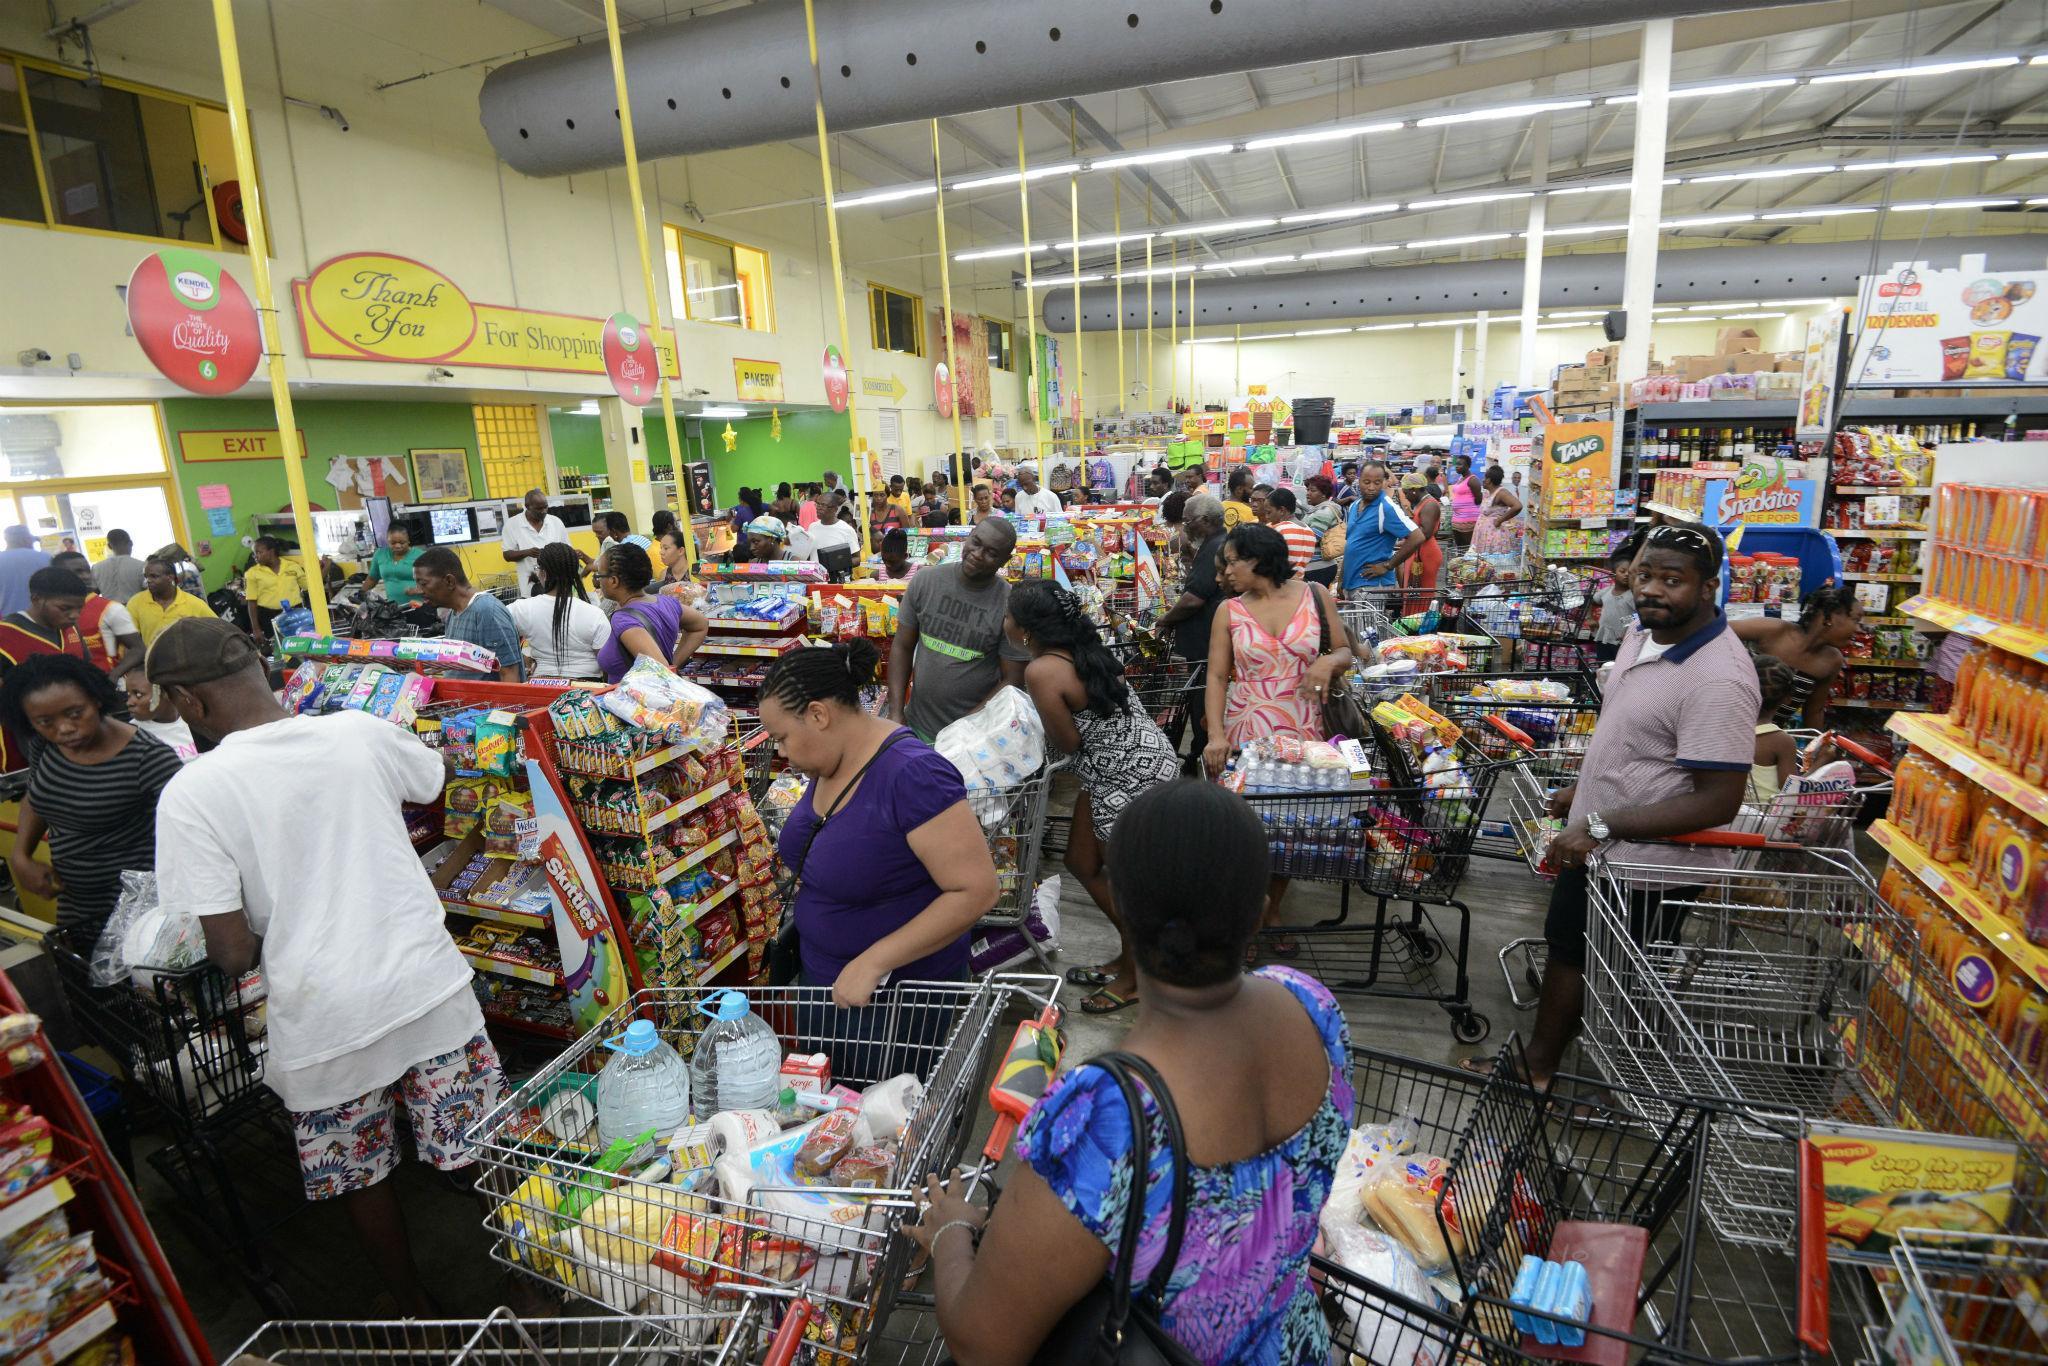 Shoppers in Jamaica stock up on emergency supplies ahead of Hurricane Matthew's arrival